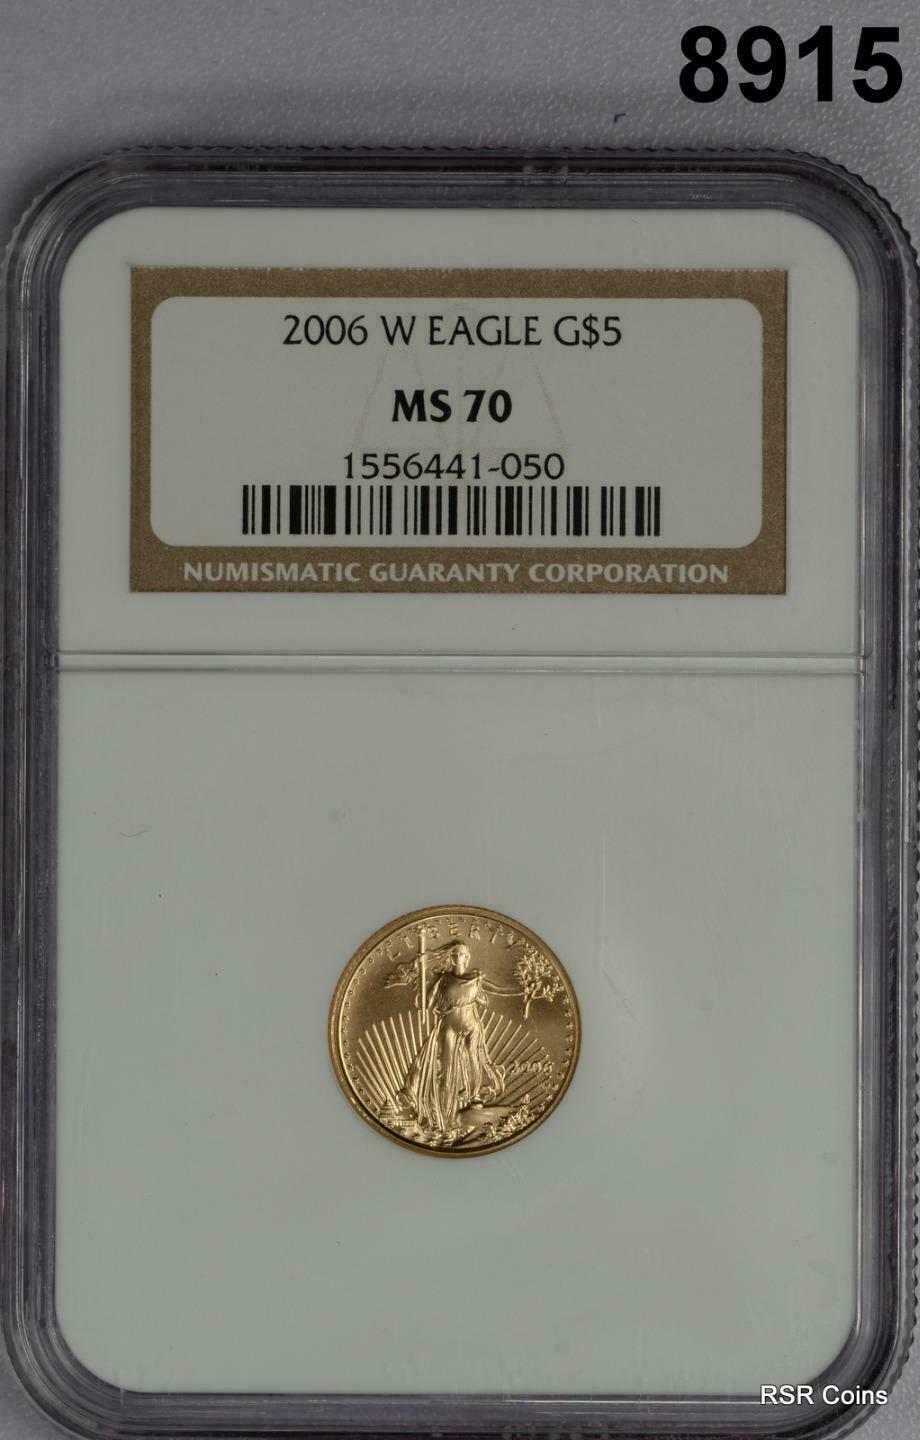 2006 W $5 GOLD EAGLE BURNISHED NGC CERTIFIED MS70 1/10TH OZ GOLD! #8915